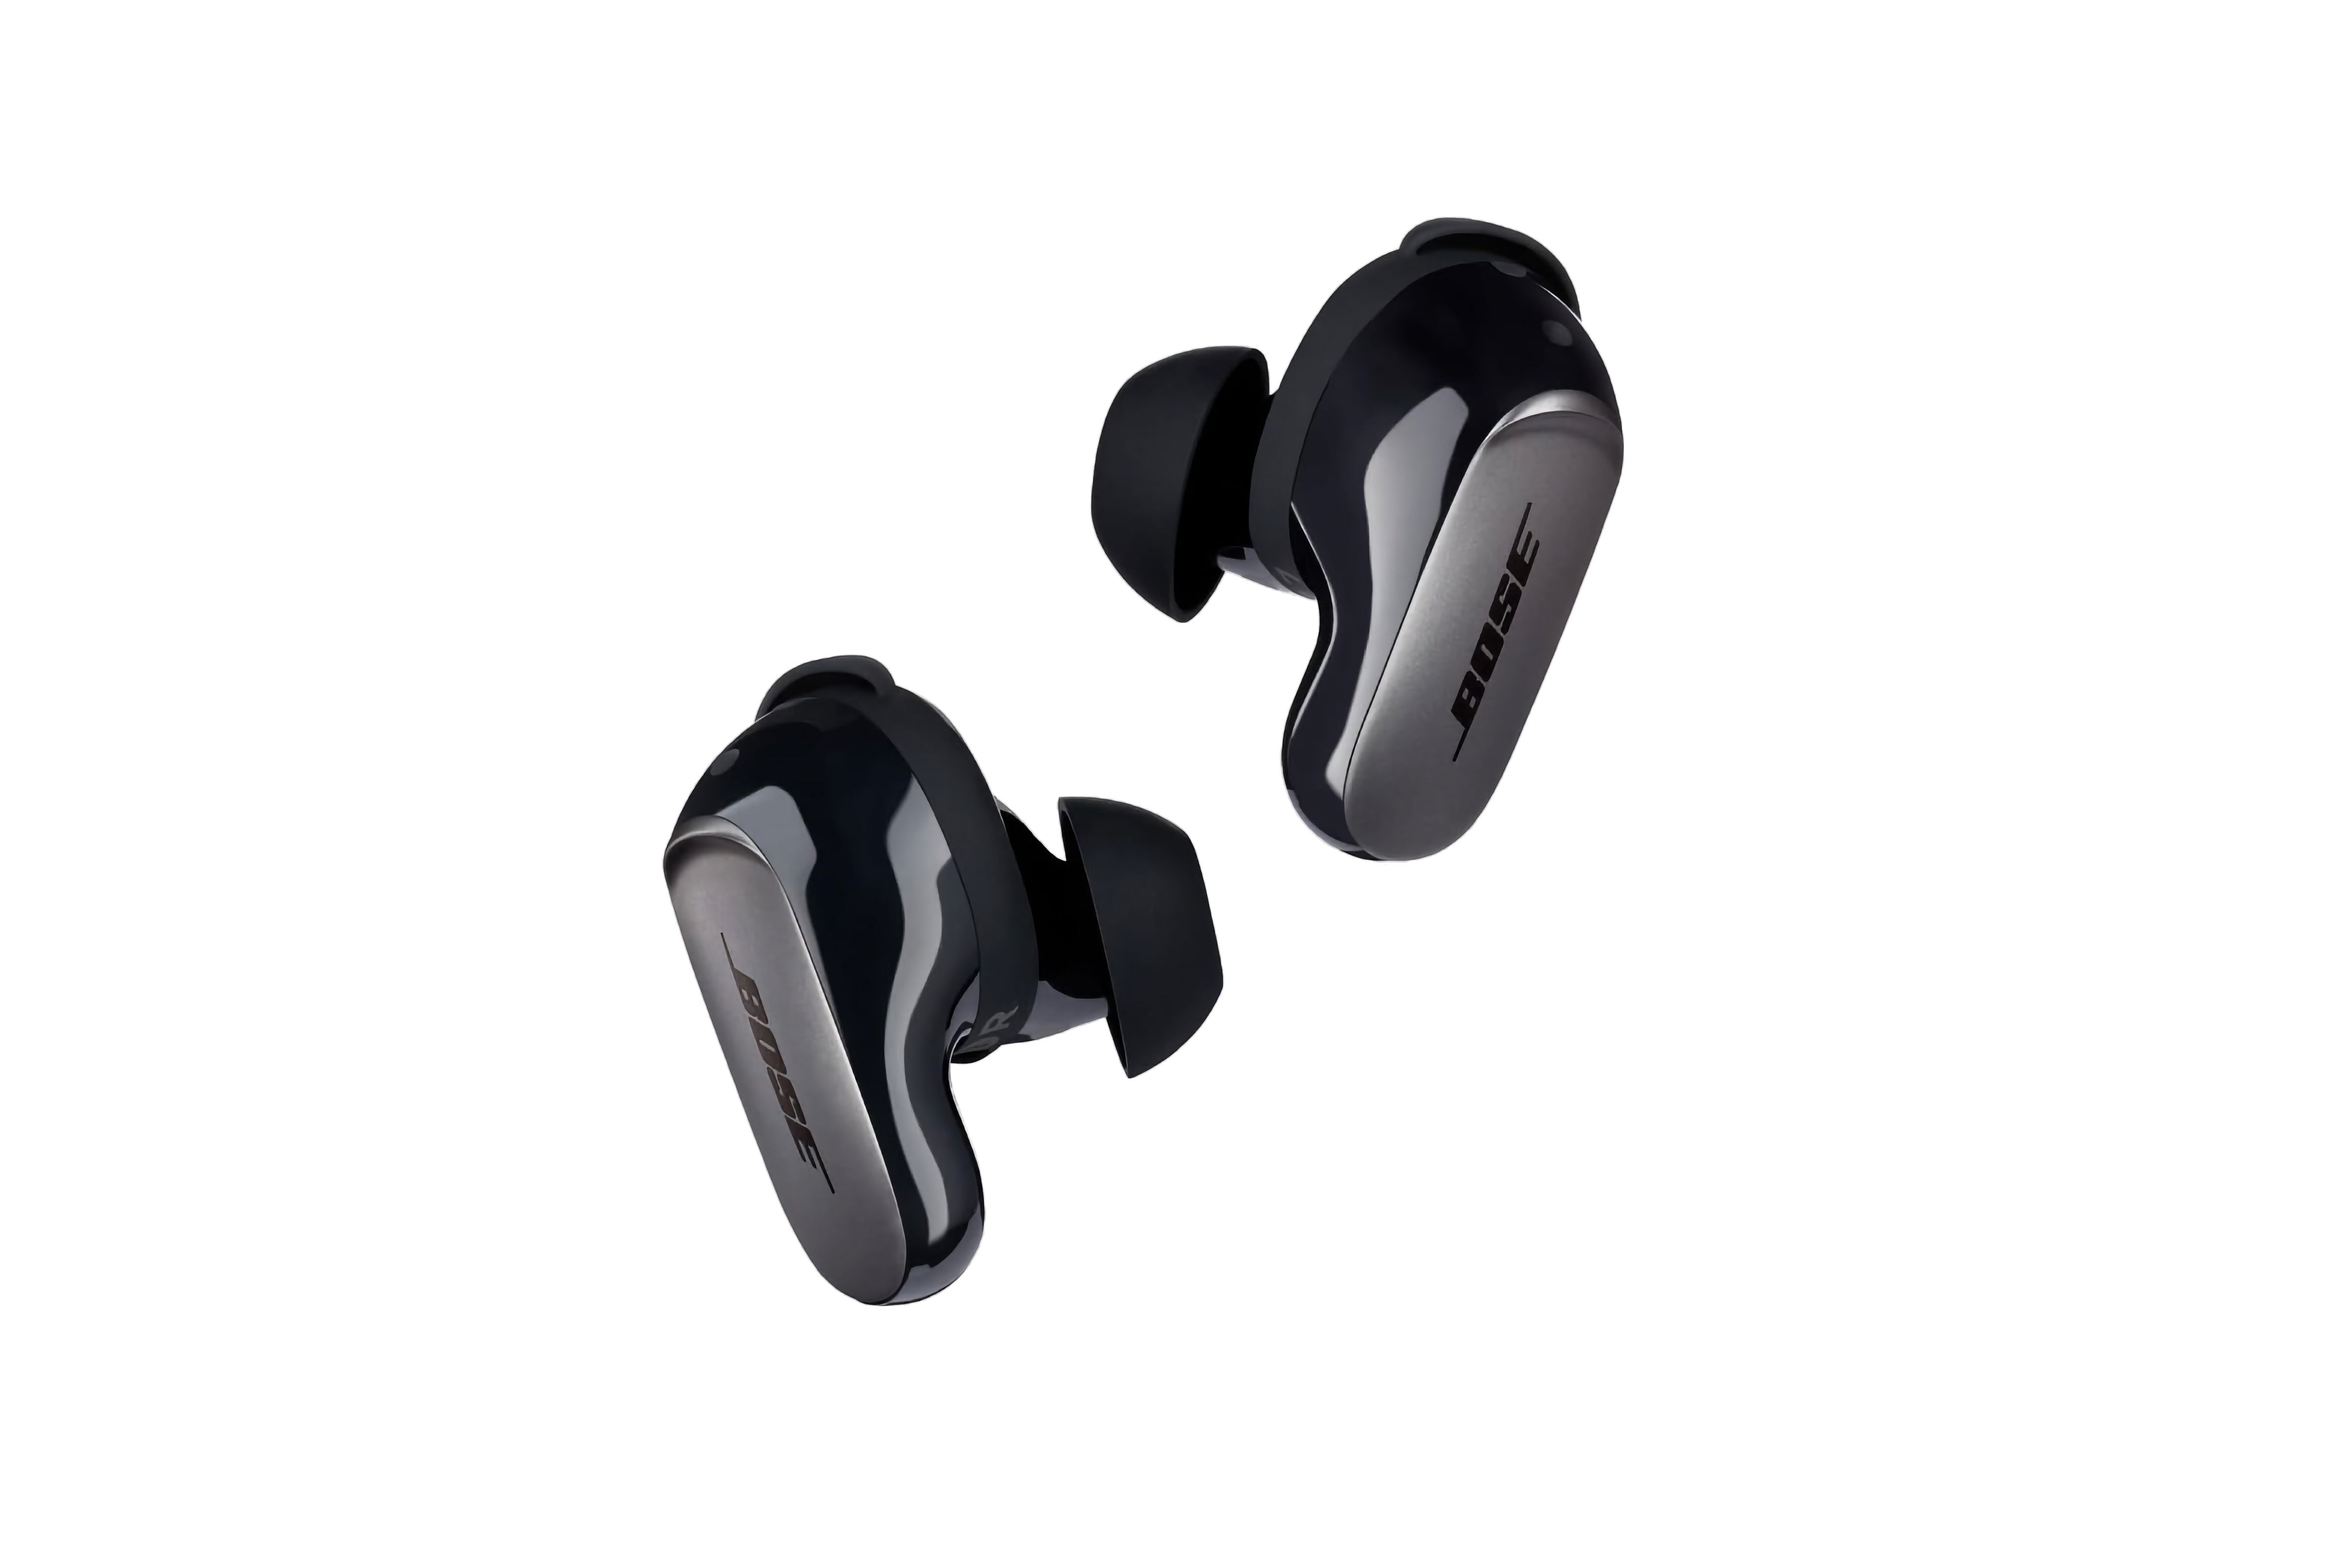 Shiny black wireless earbuds with Bose written on the side.